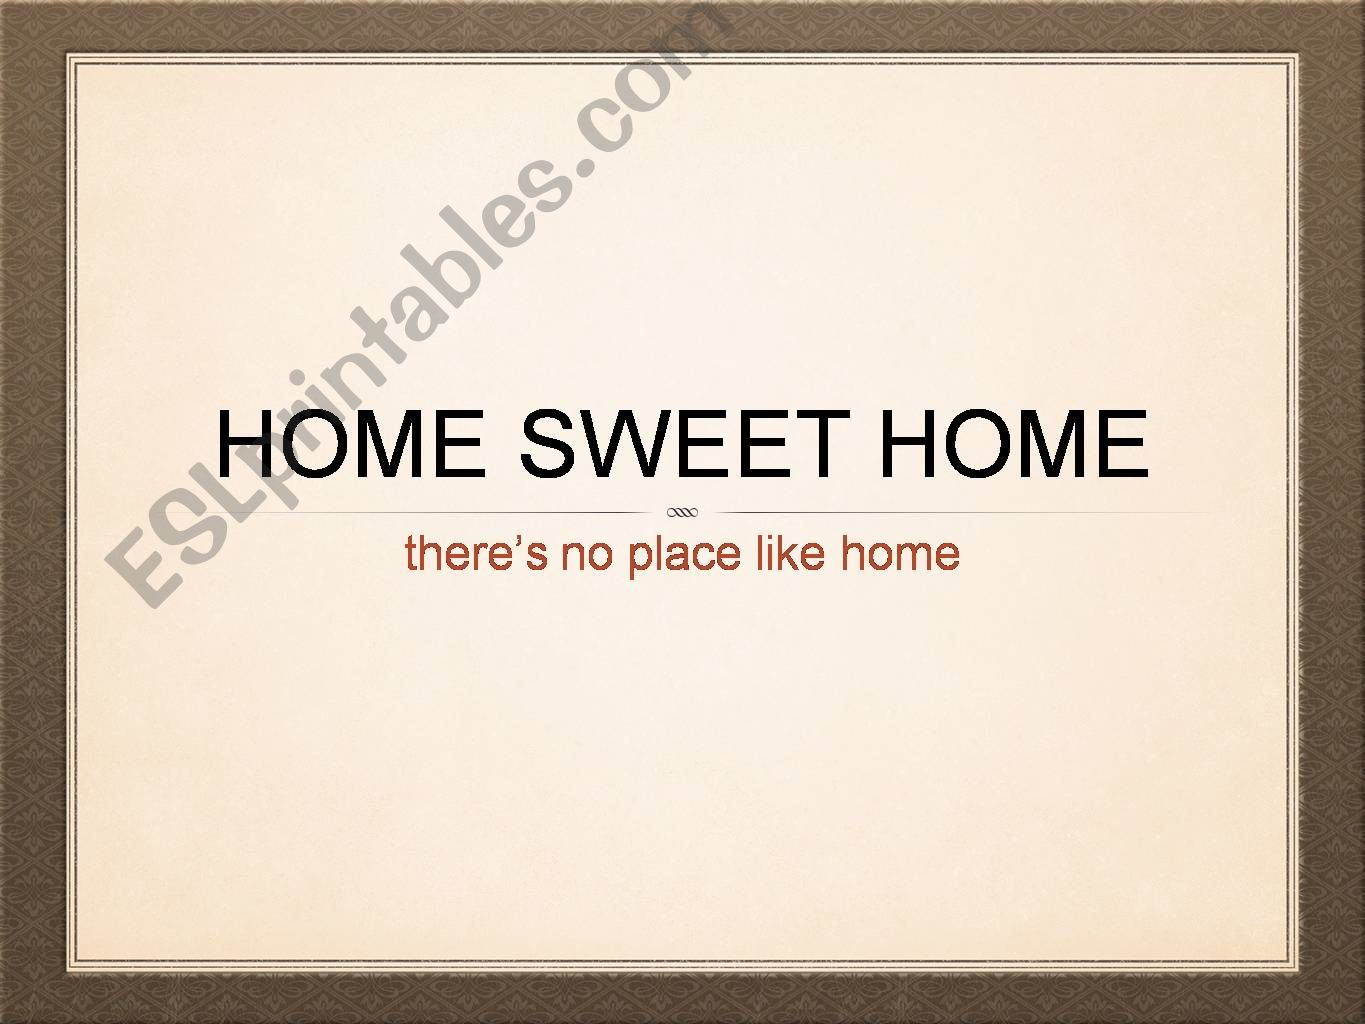 Home sweet home powerpoint